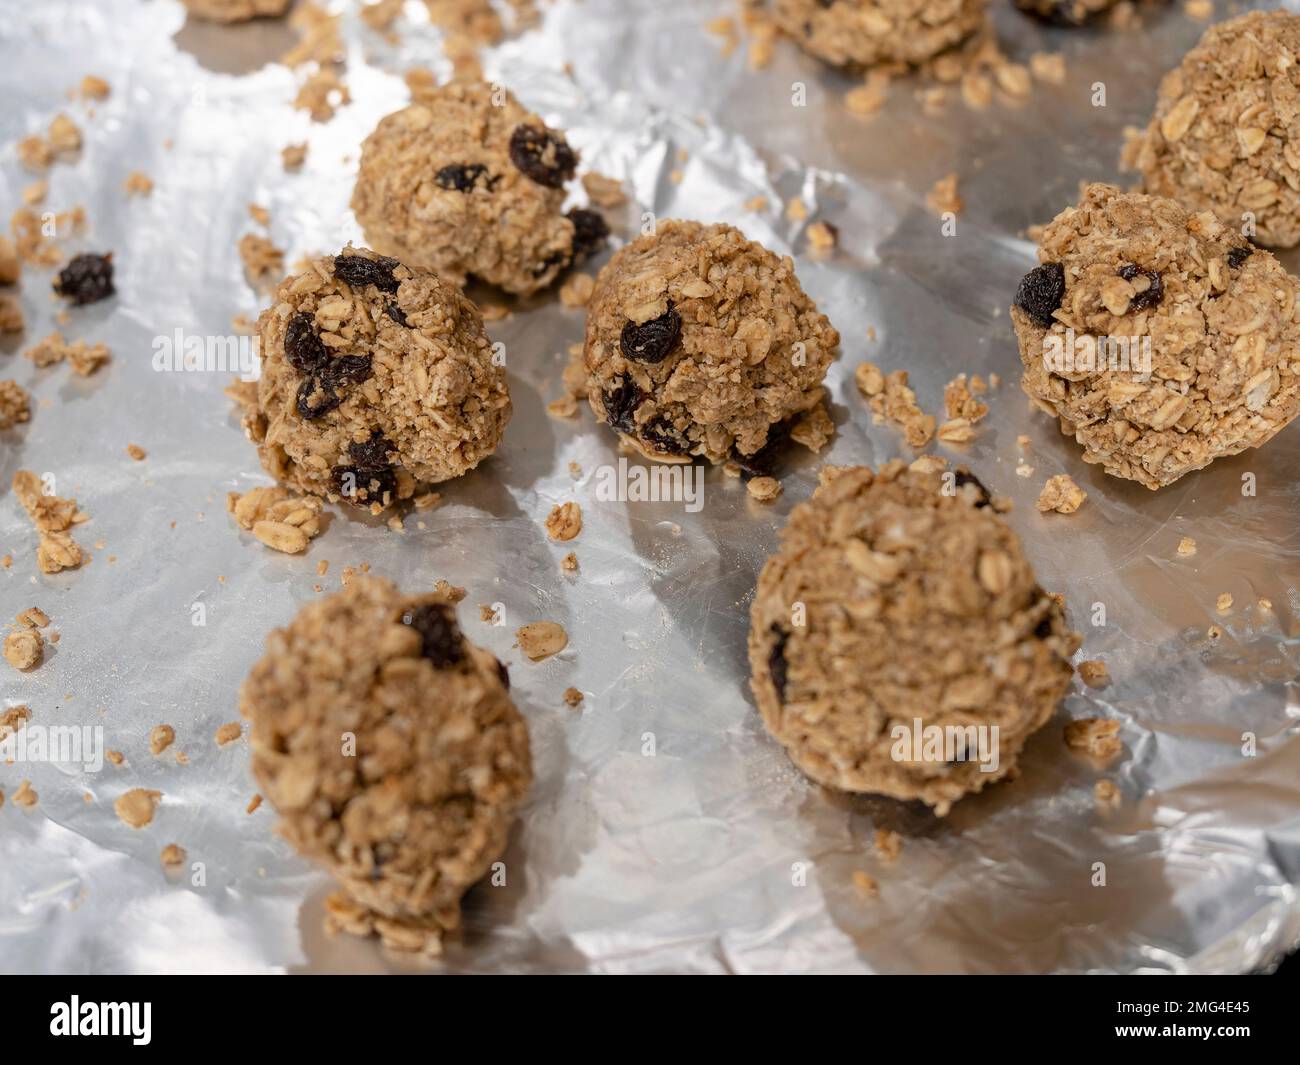 Homemade health food or healthy granola cookies fresh out of the oven for a healthy llifestyle. Stock Photo